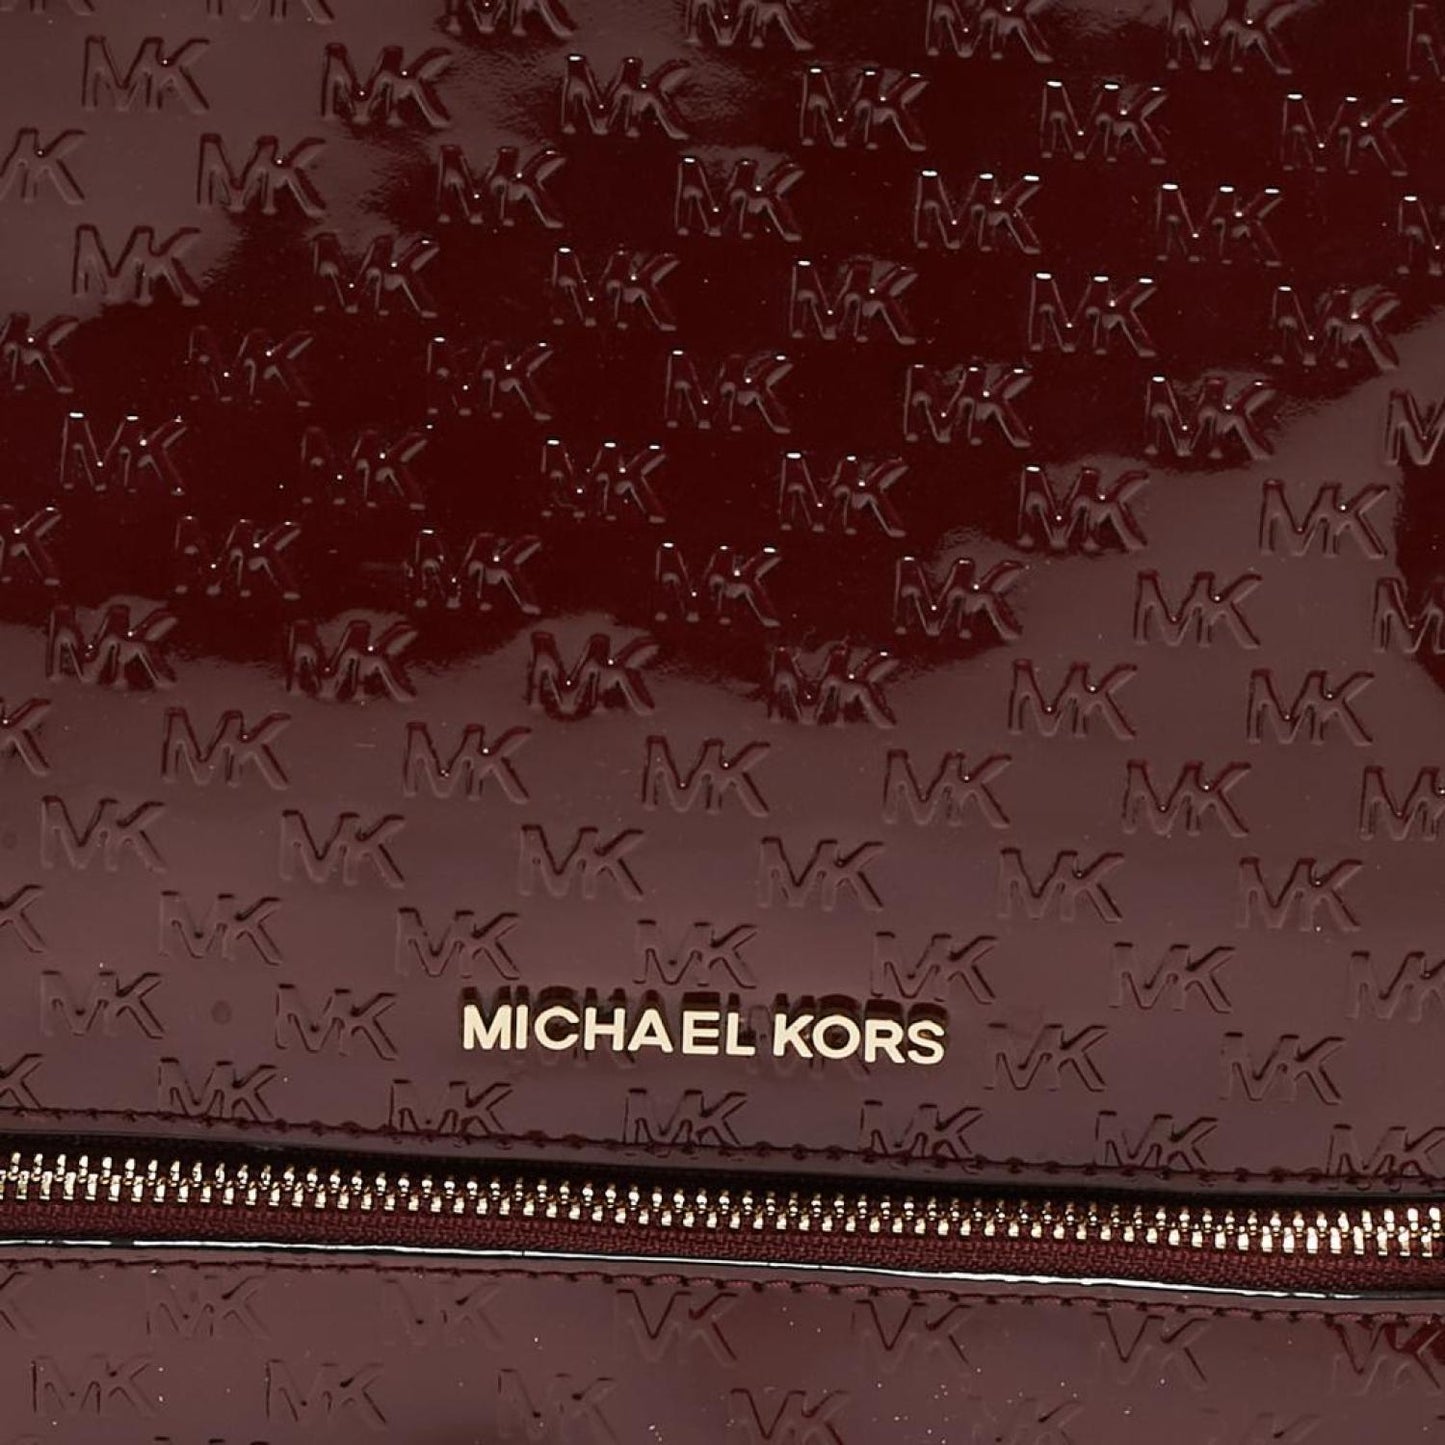 Michael Kors Signature Embossed Patent Leather And Coated Canvas Rhea Backpack